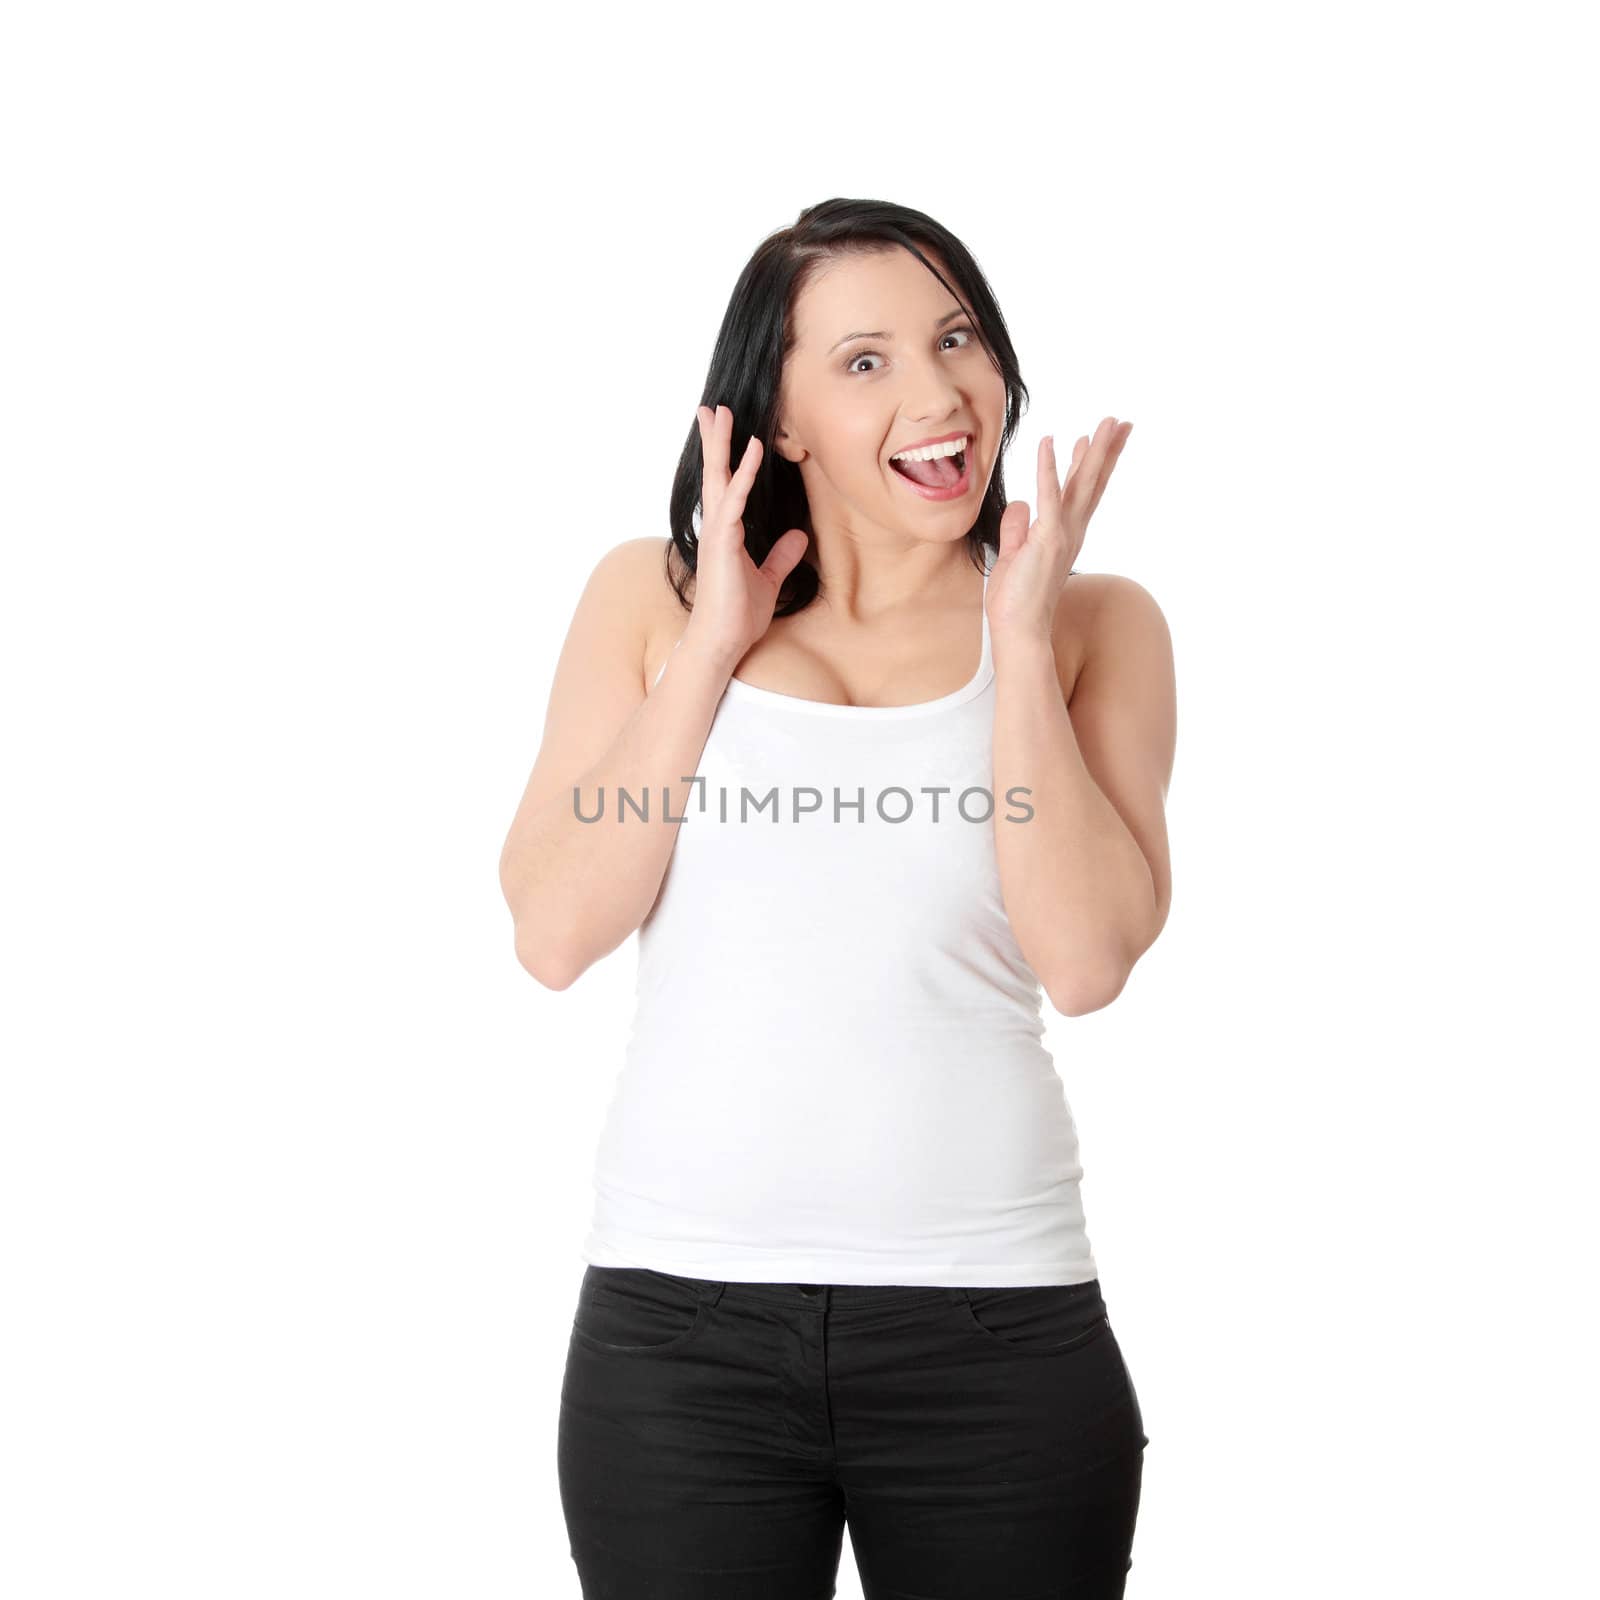 Shocked woman portrait, over white background